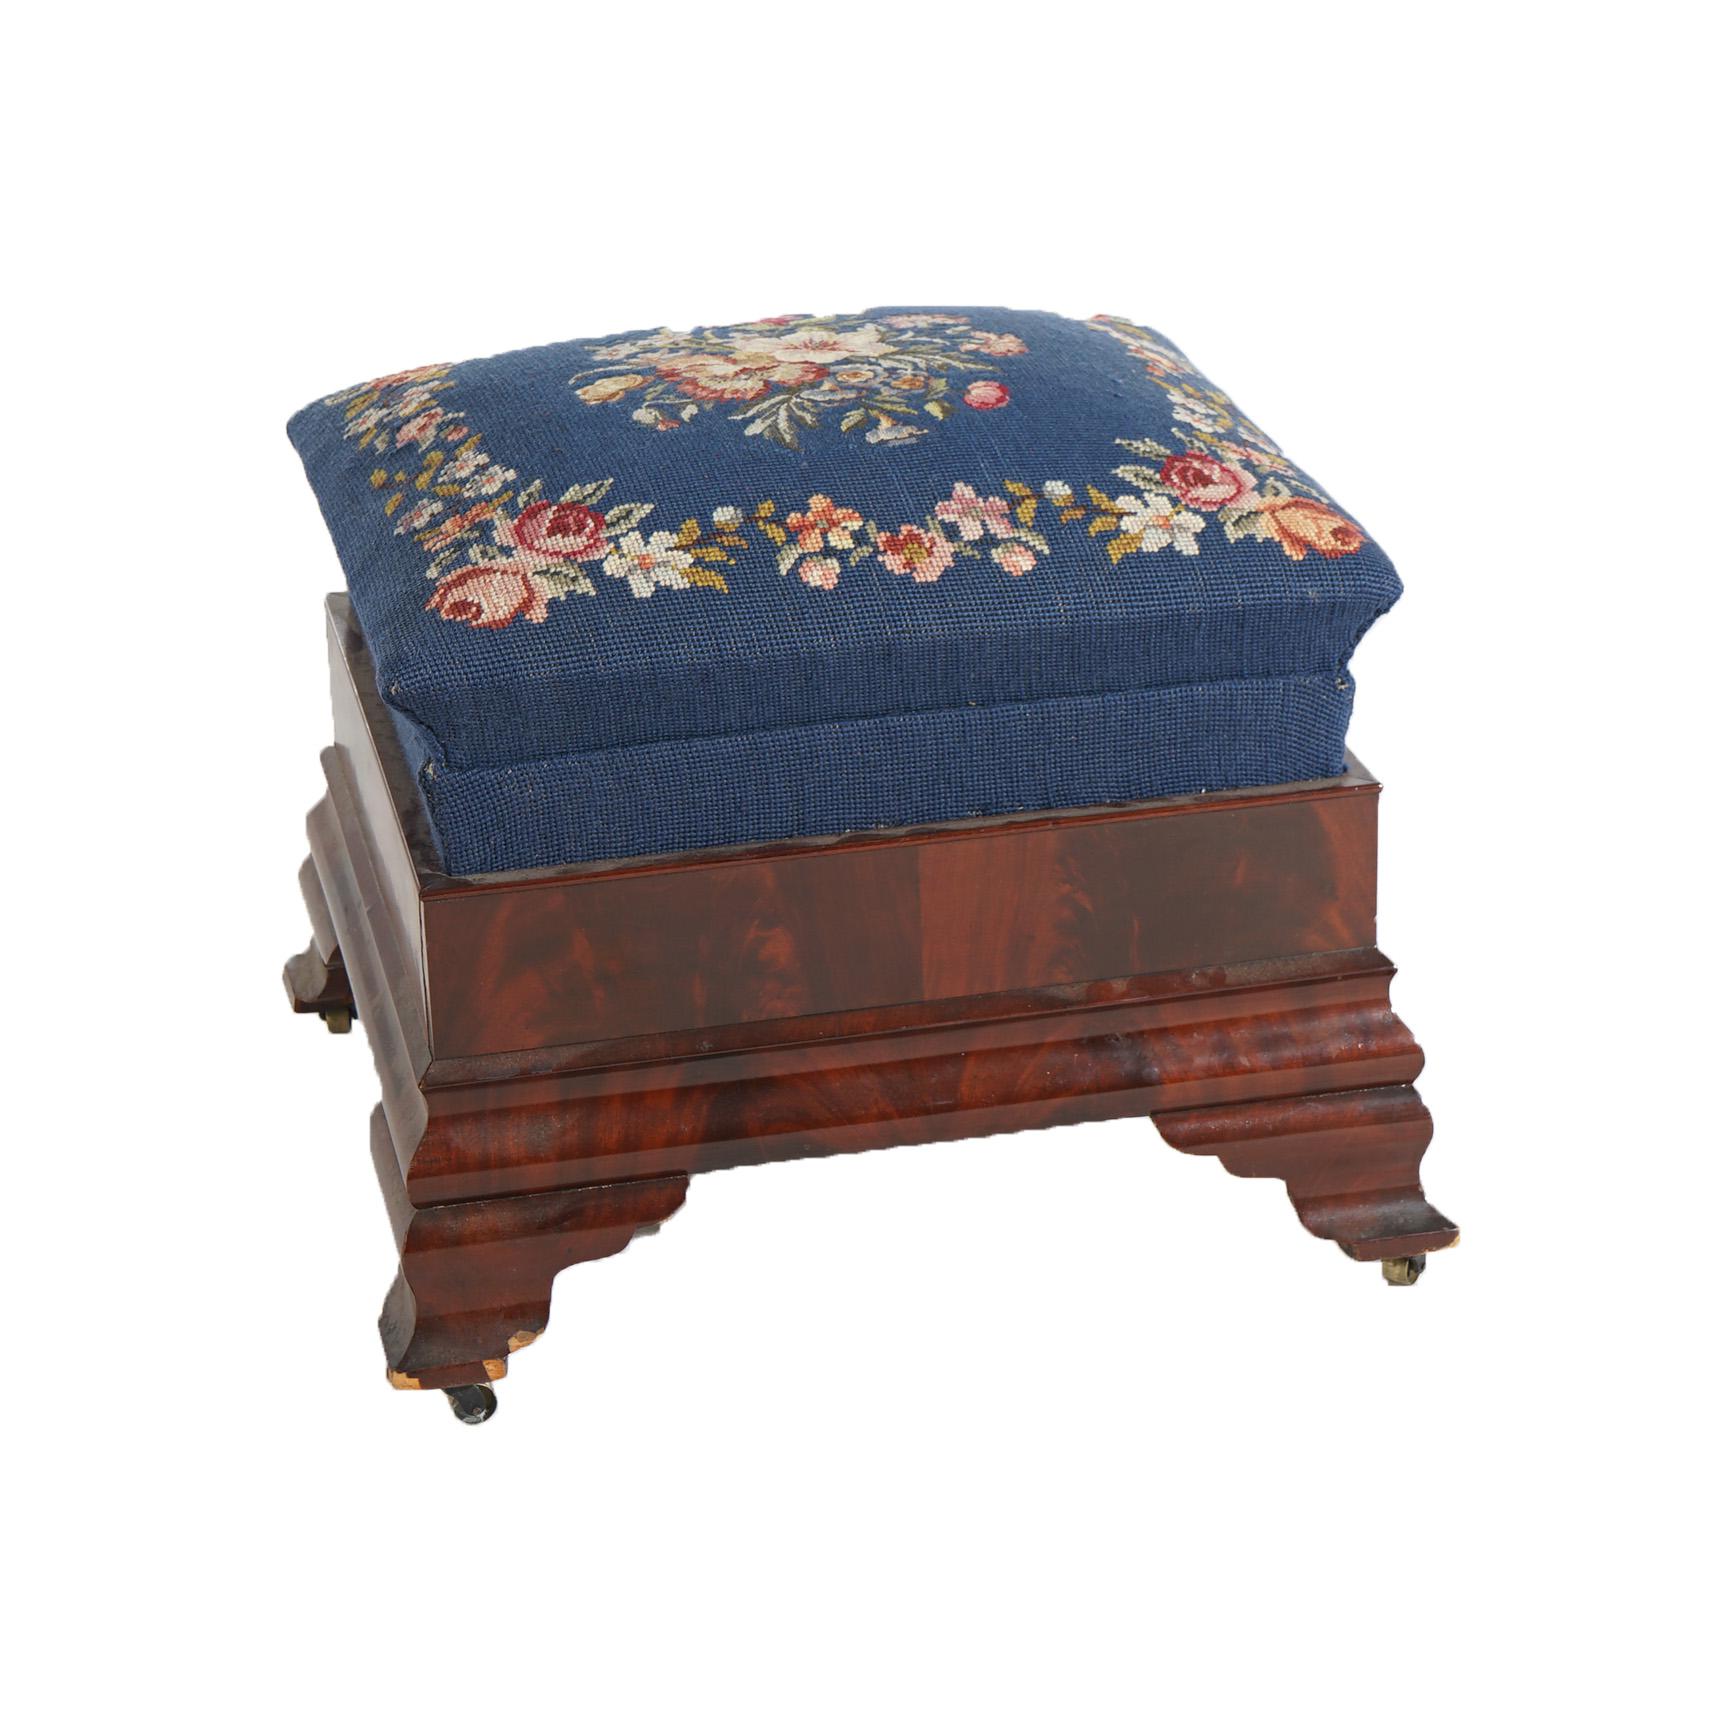 Antique American Empire Classical Greco Flame Mahogany Needlepoint Stool 19thC For Sale 2